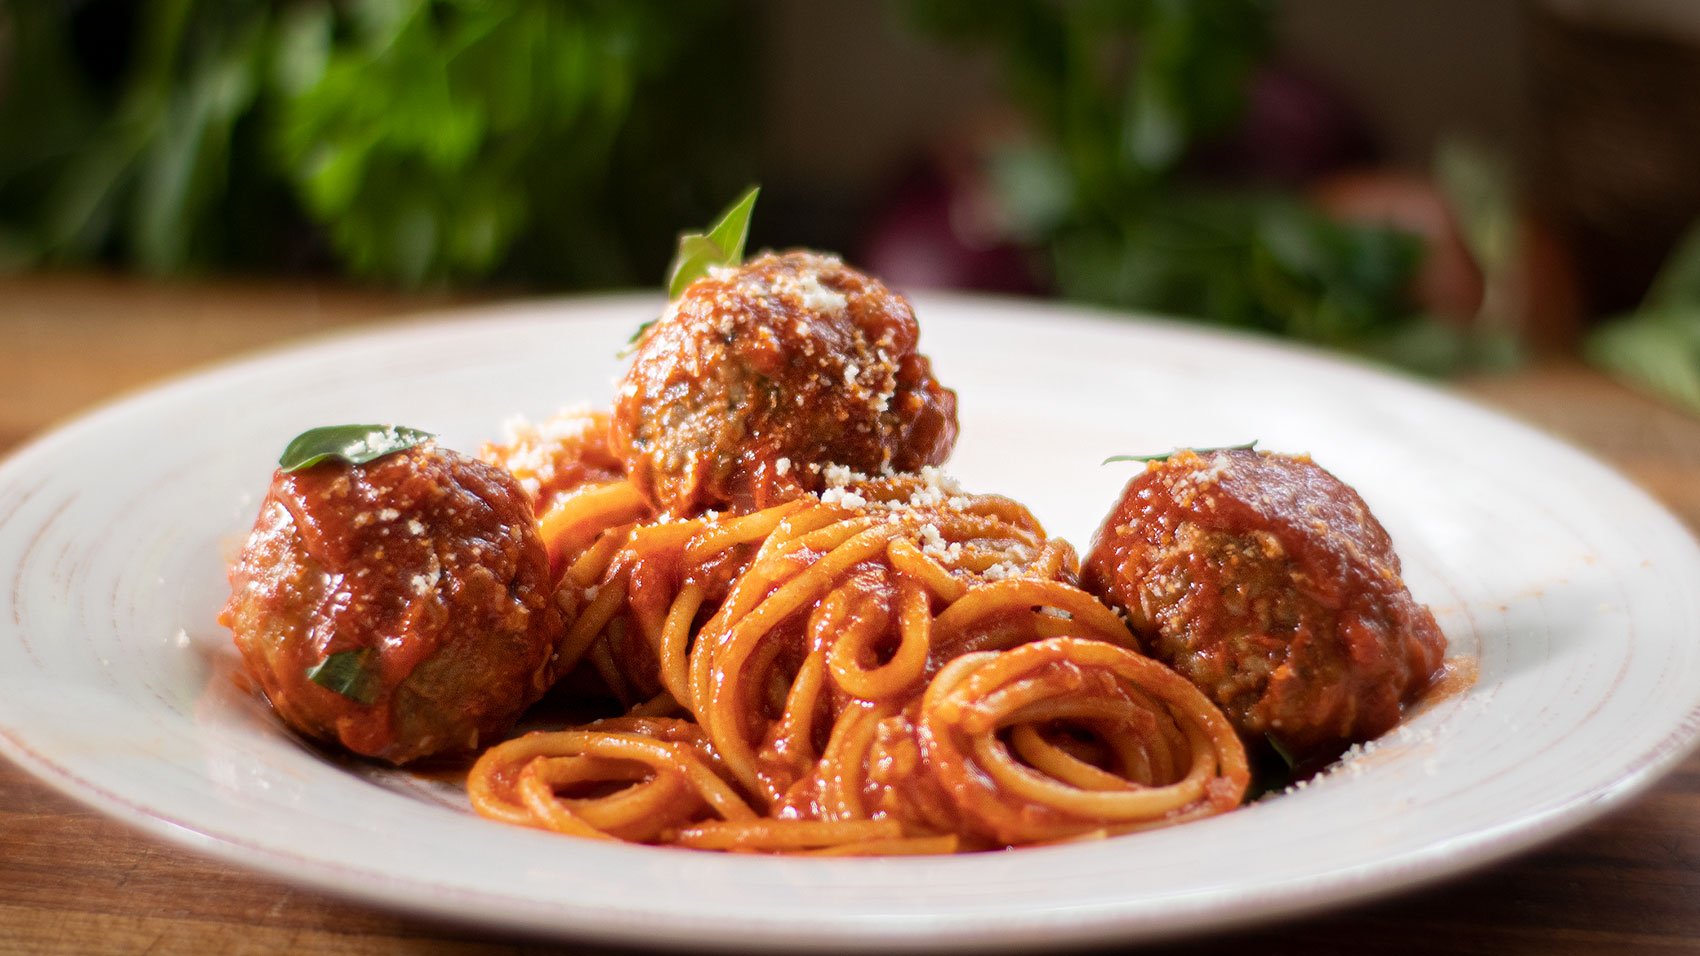 Spaghetti and Meatballs - Easy Meals with Video Recipes by Chef Joel Mielle  - RECIPE30